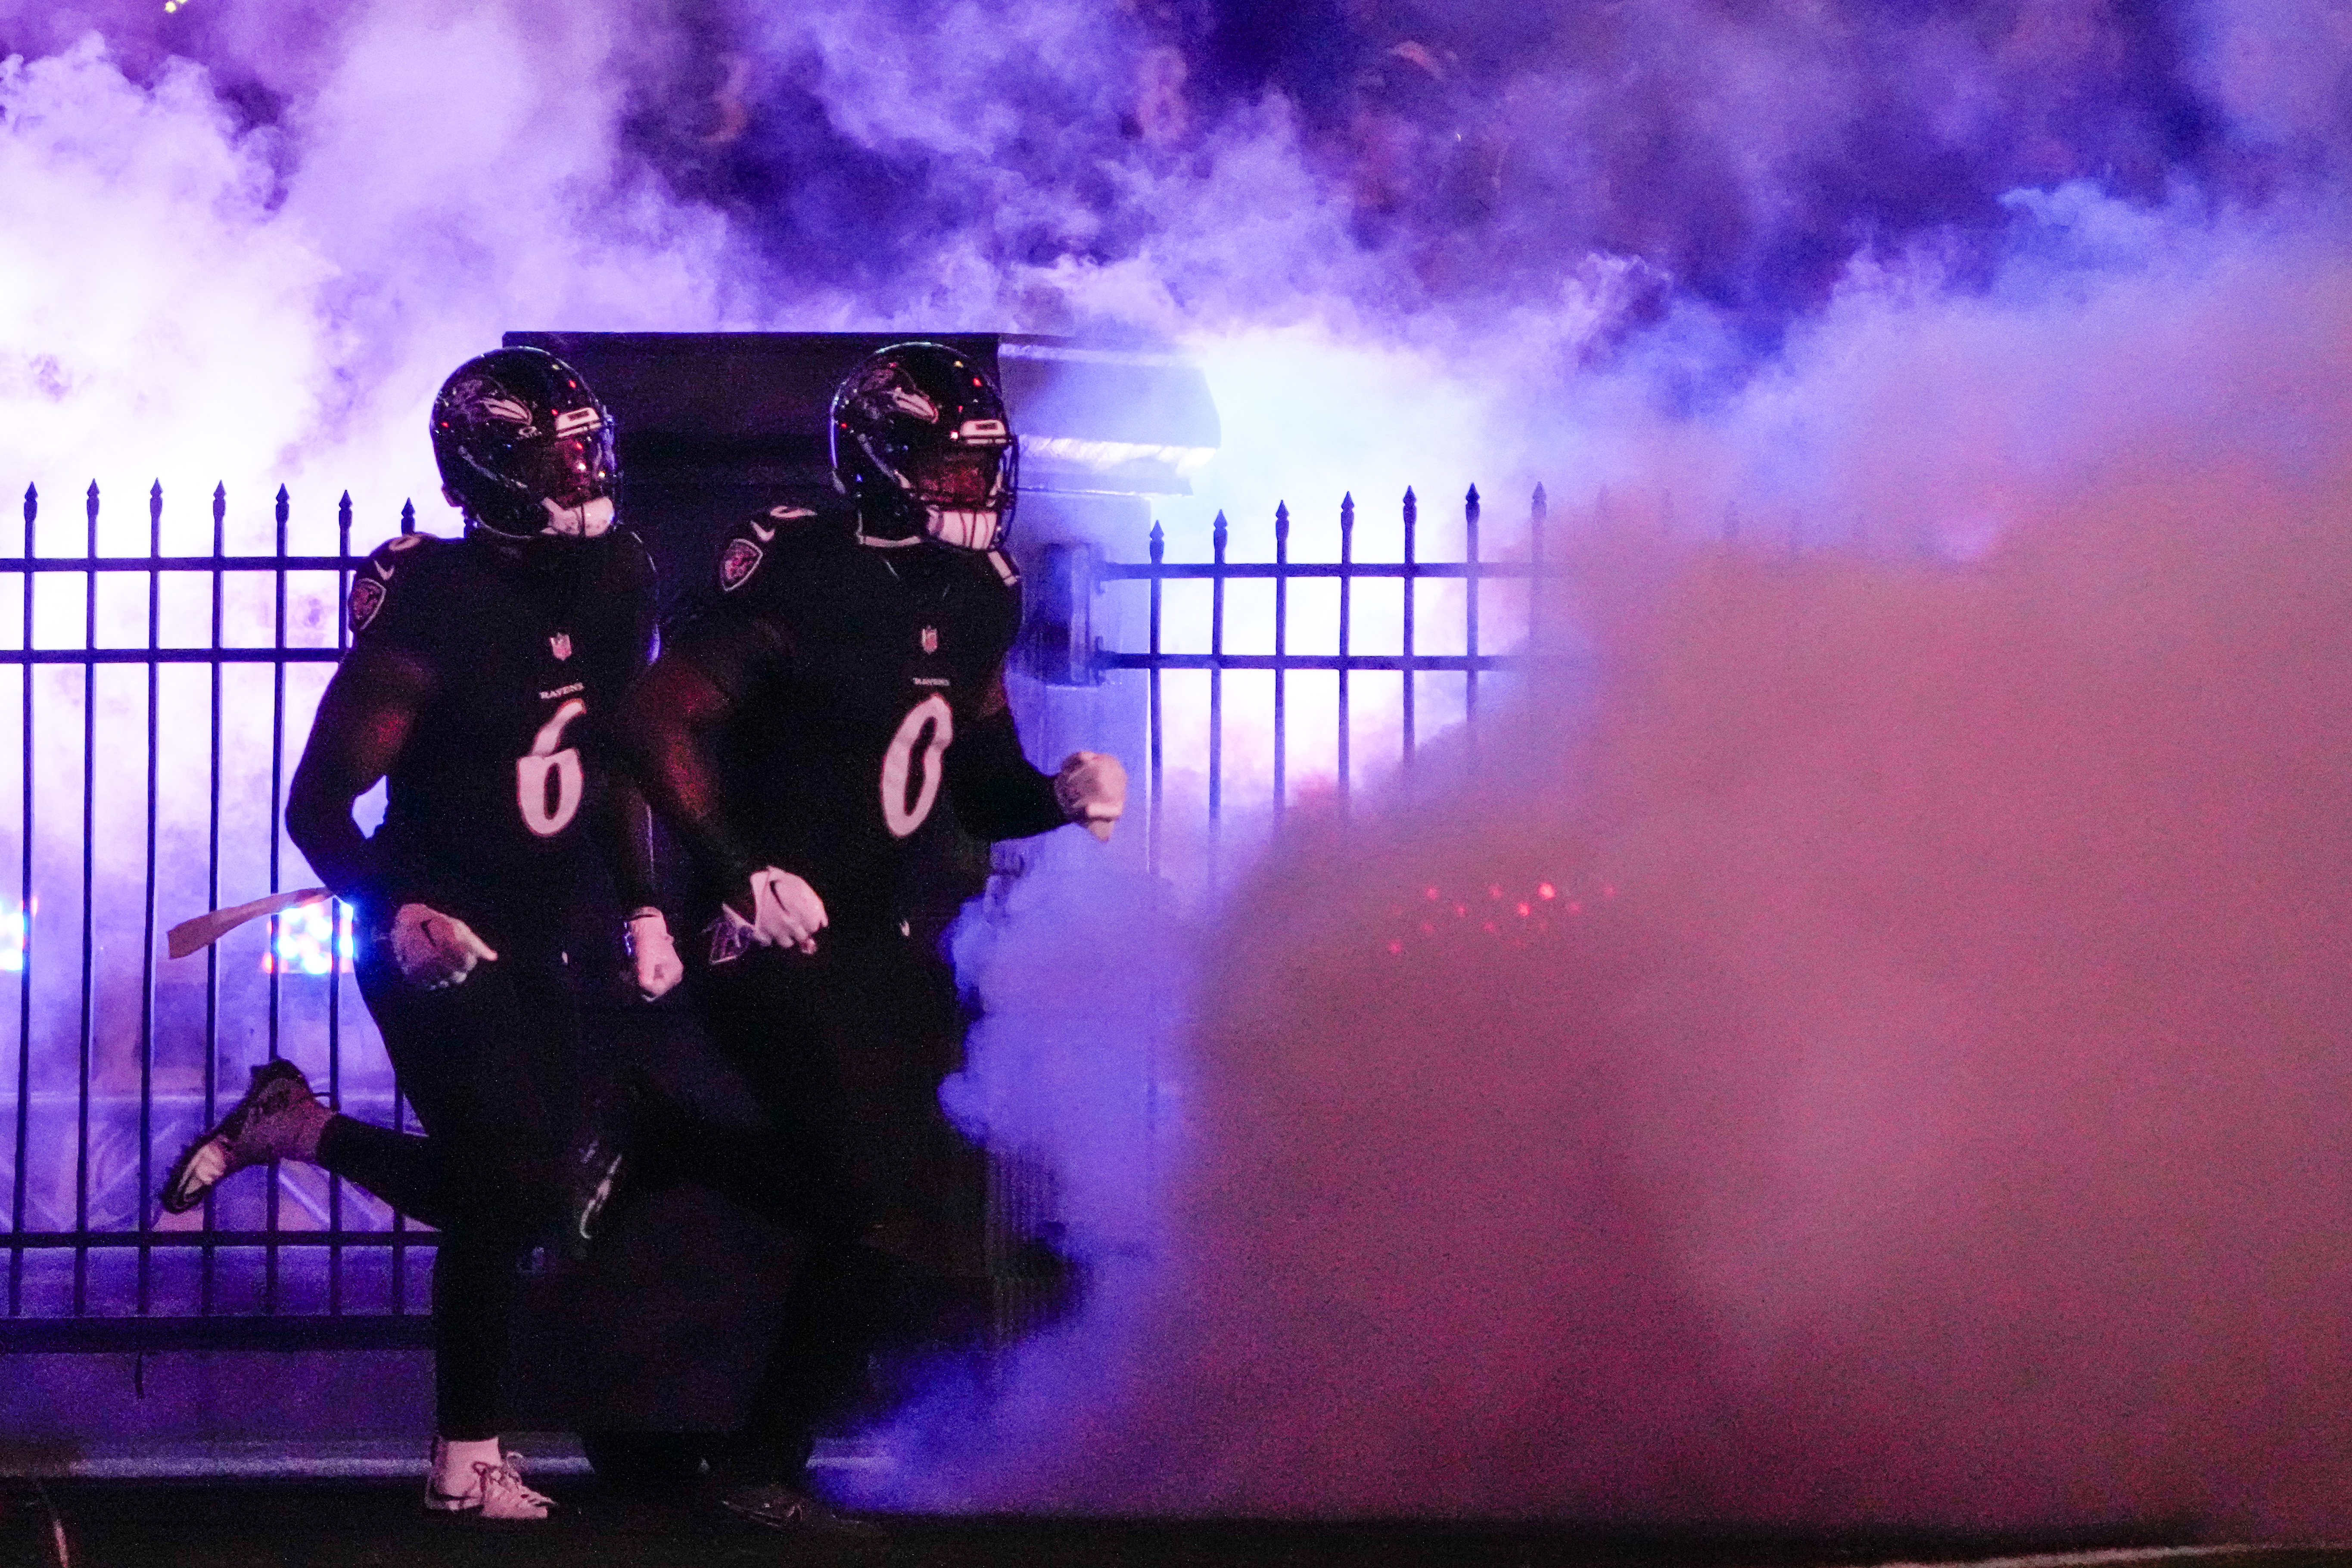 Seven Ravens named to the 2023 Pro Bowl team - The Baltimore Banner